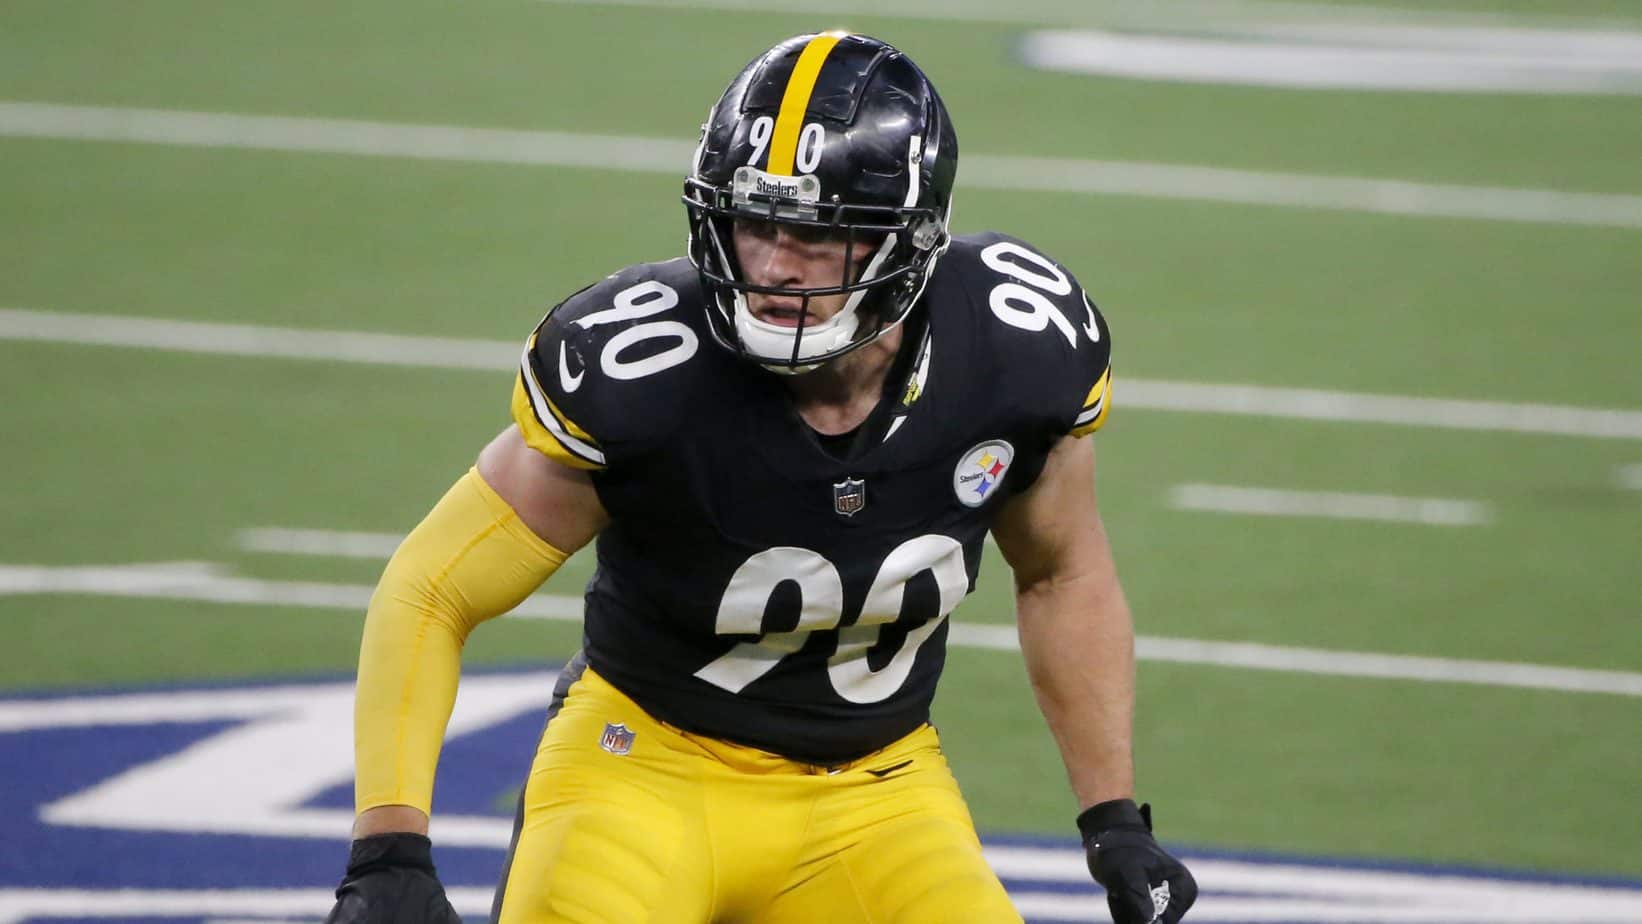 Pittsburgh Steelers star defensive end TJ Watt inadvertently admitted to breaking an NFL rule when talking about his historic season on Wednesday